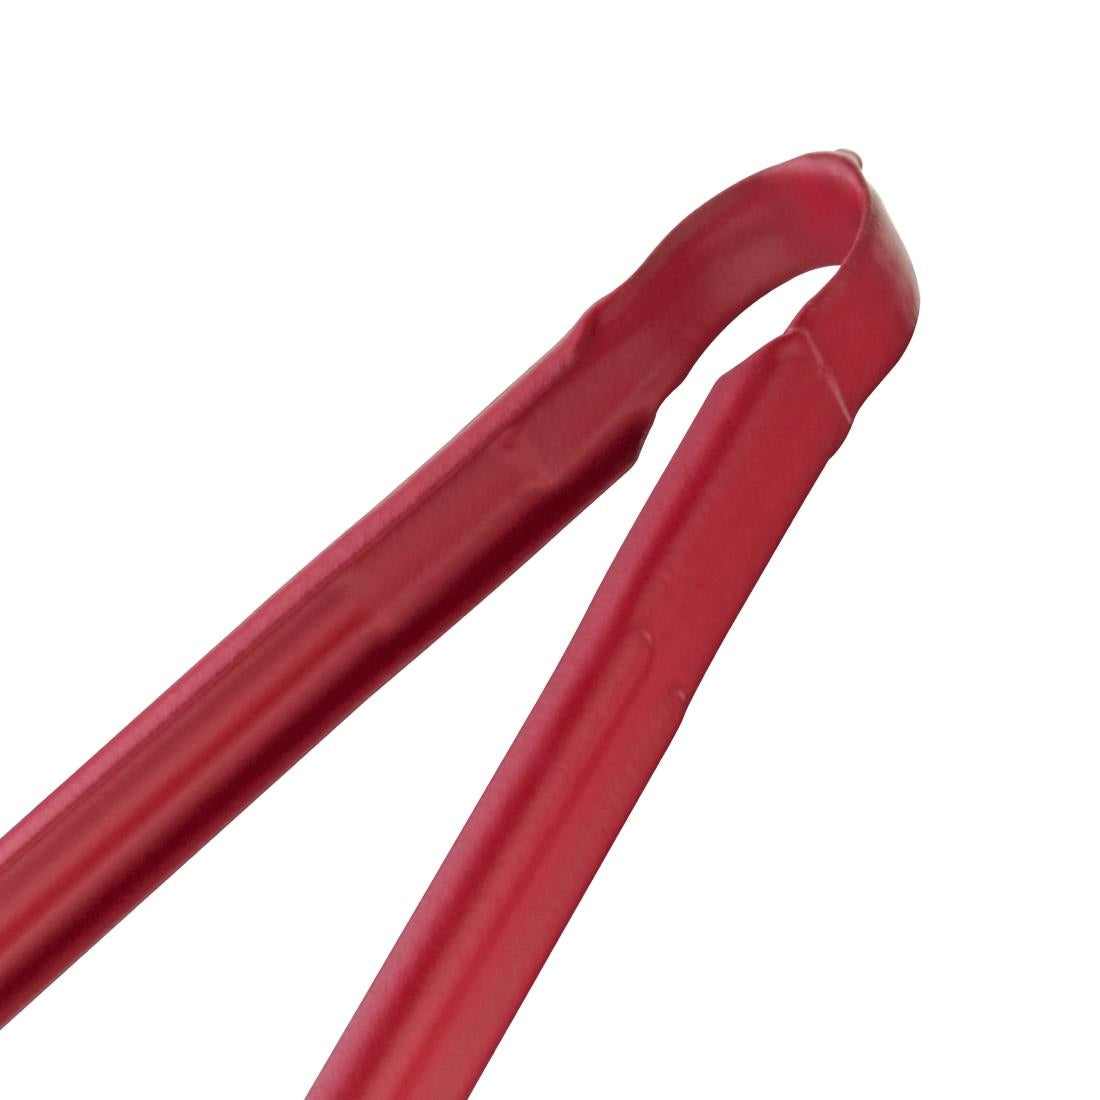 Vogue Colour Coded Serving Tong Red 405mm